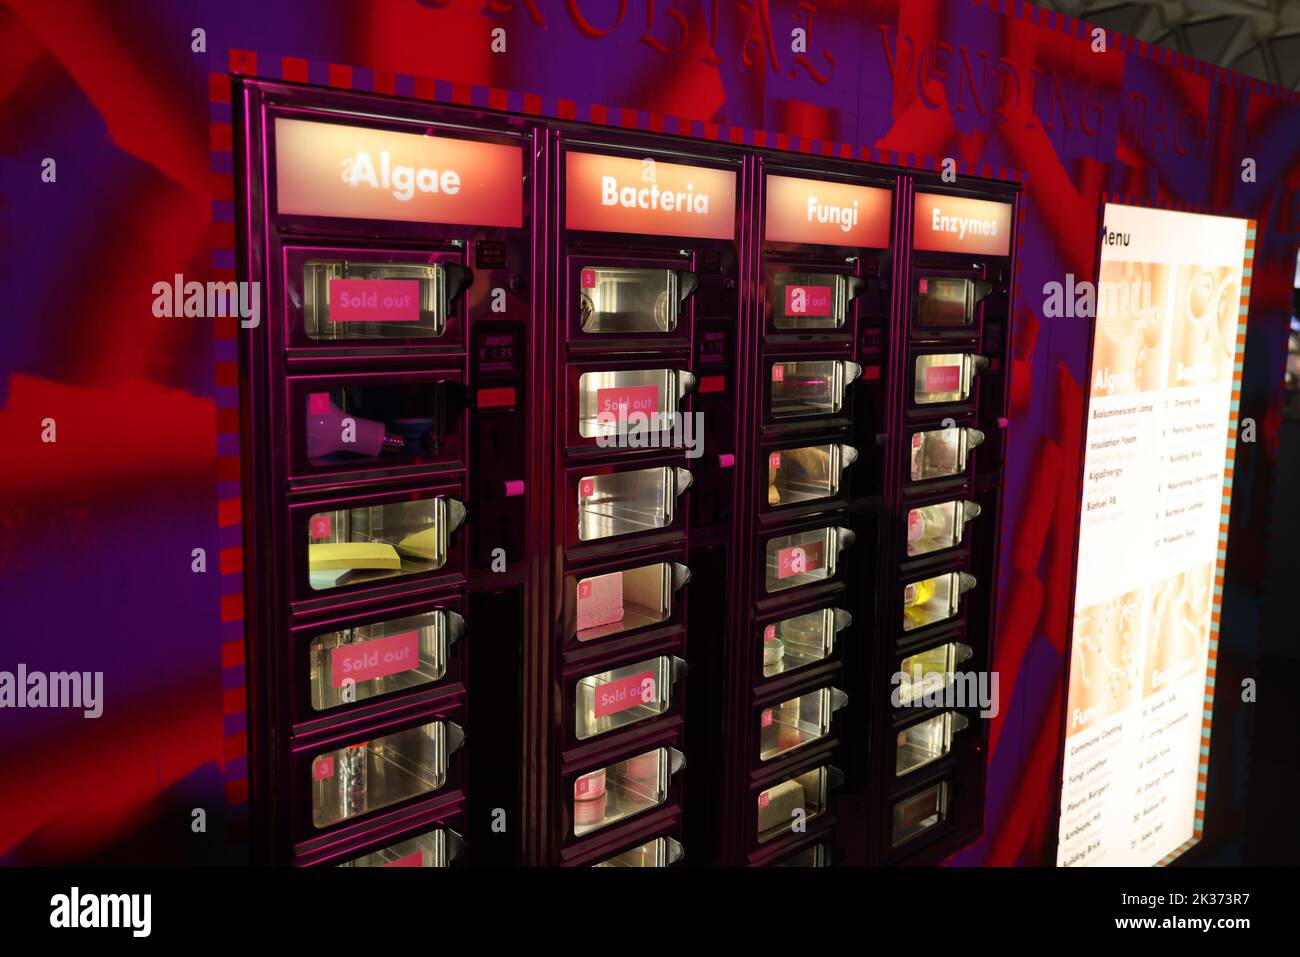 Conceptual vending machine wall with products& innovations based on algae, bacteria, fungi & enzymes, exhibited at the Retrofuture expo in the Evoluon Stock Photo